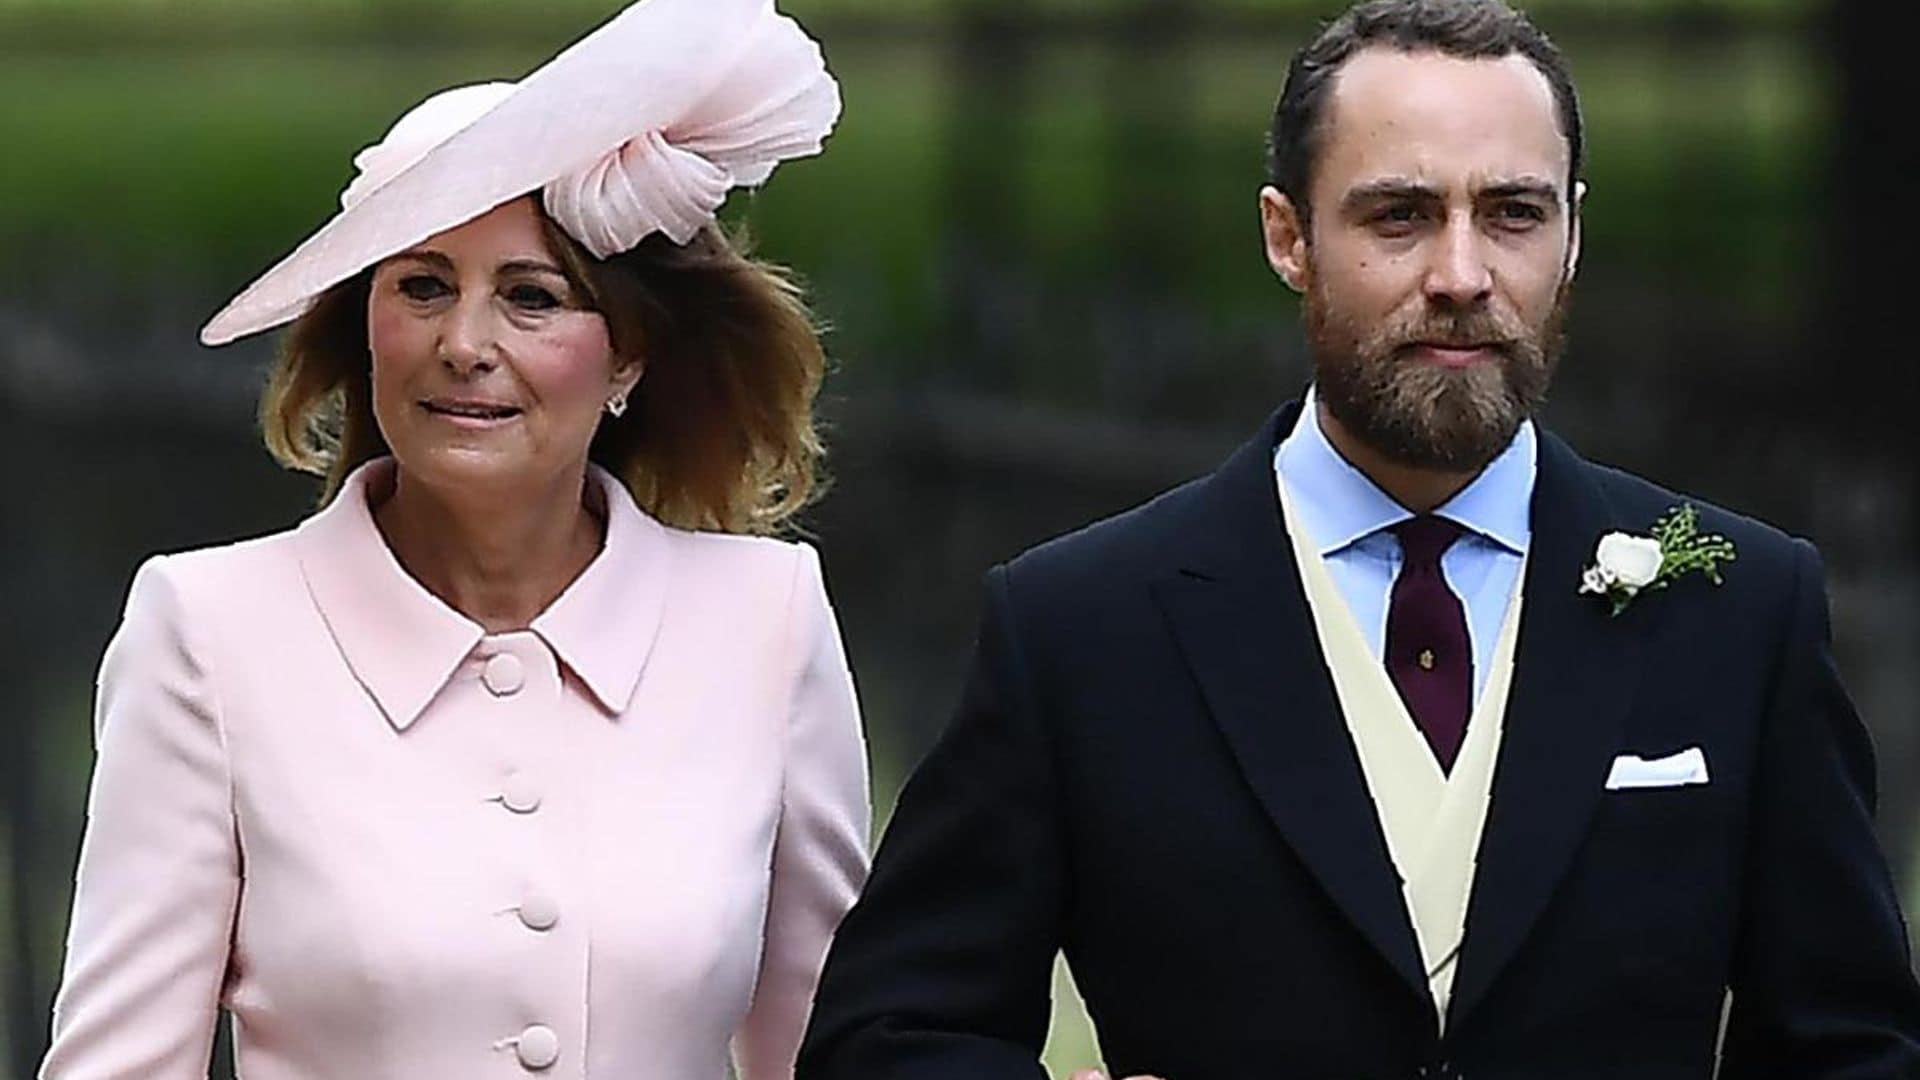 Did the Princess of Wales' brother share a picture from his wedding?